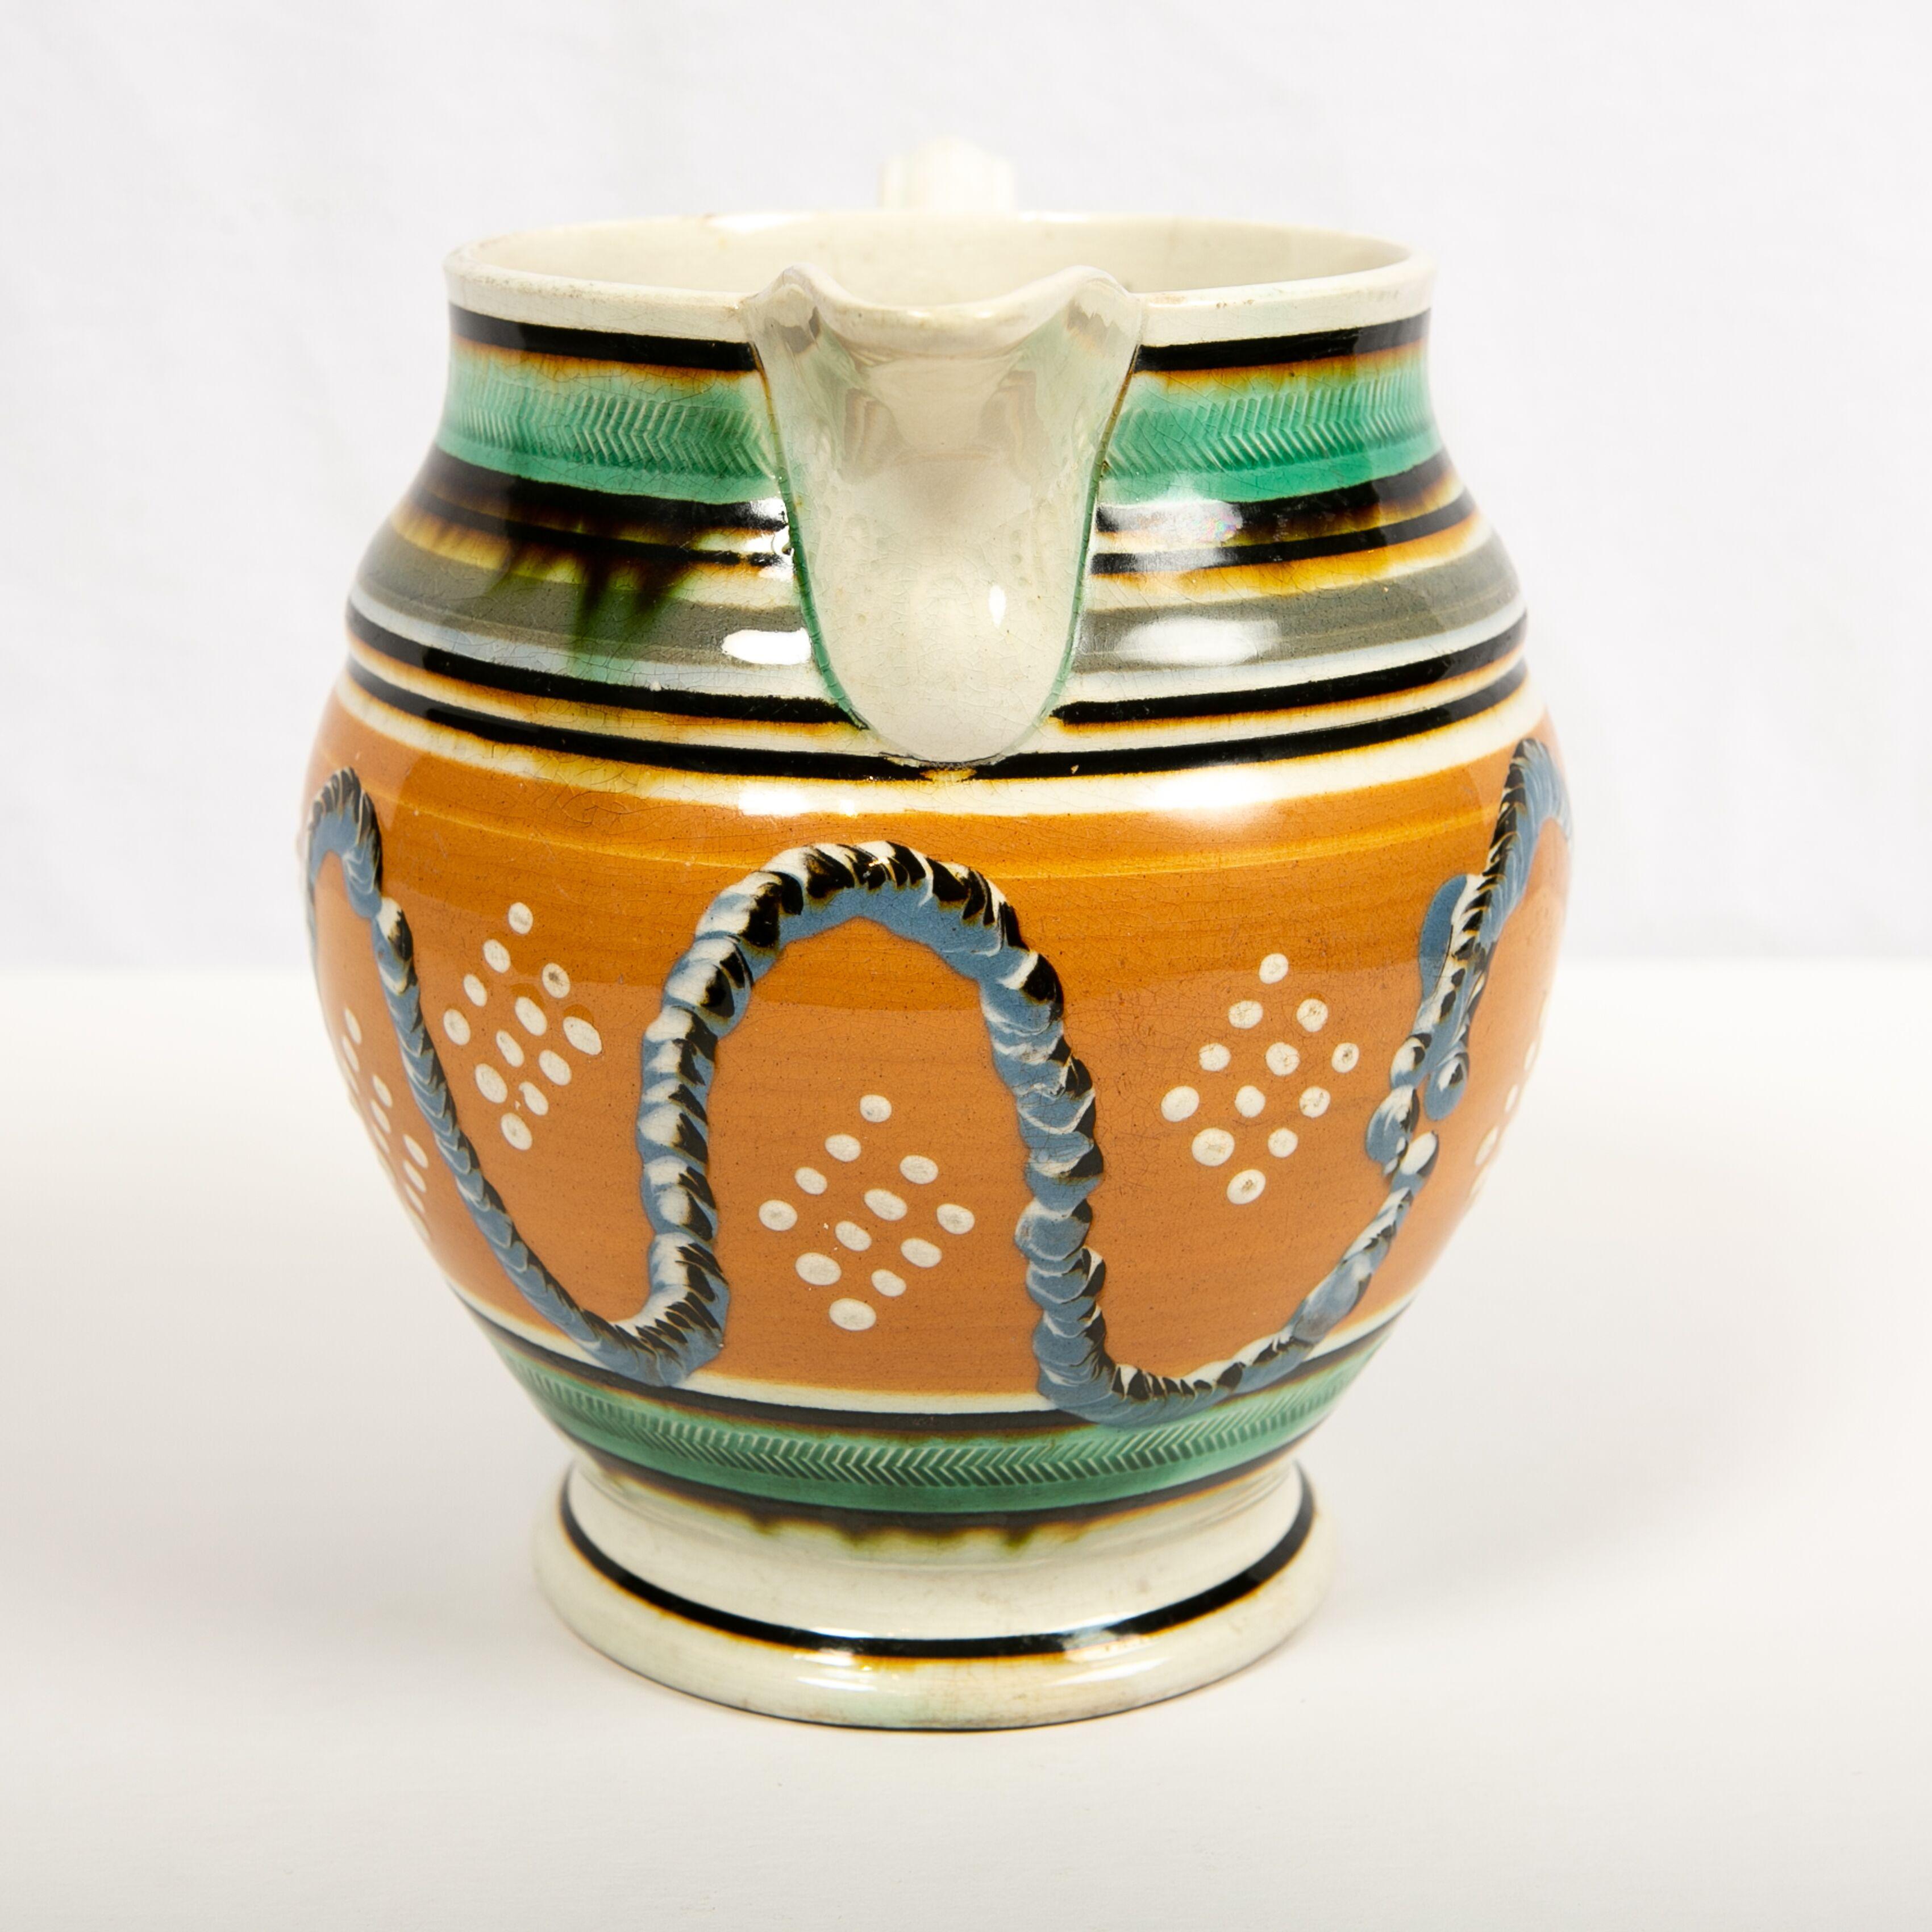 Earthenware Creamware Mochaware Pitcher Decorated with Cable and Dot Decoration, England